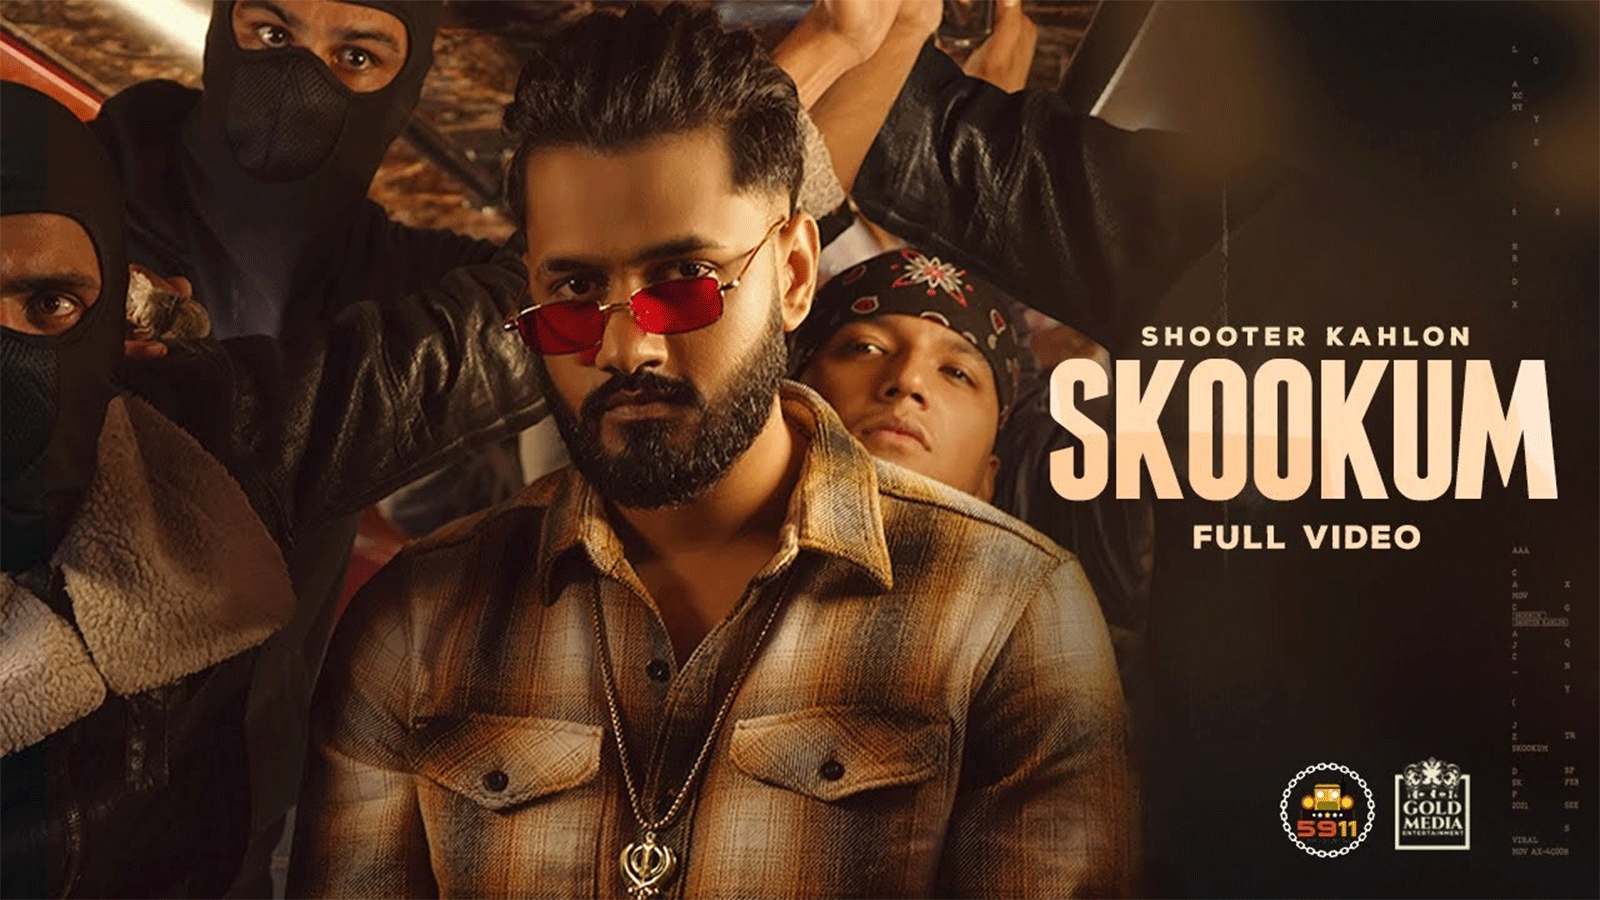 Watch Latest 2021 Punjabi Song 'Skookum' Sung By Shooter Kahlon | Punjabi  Video Songs - Times of India